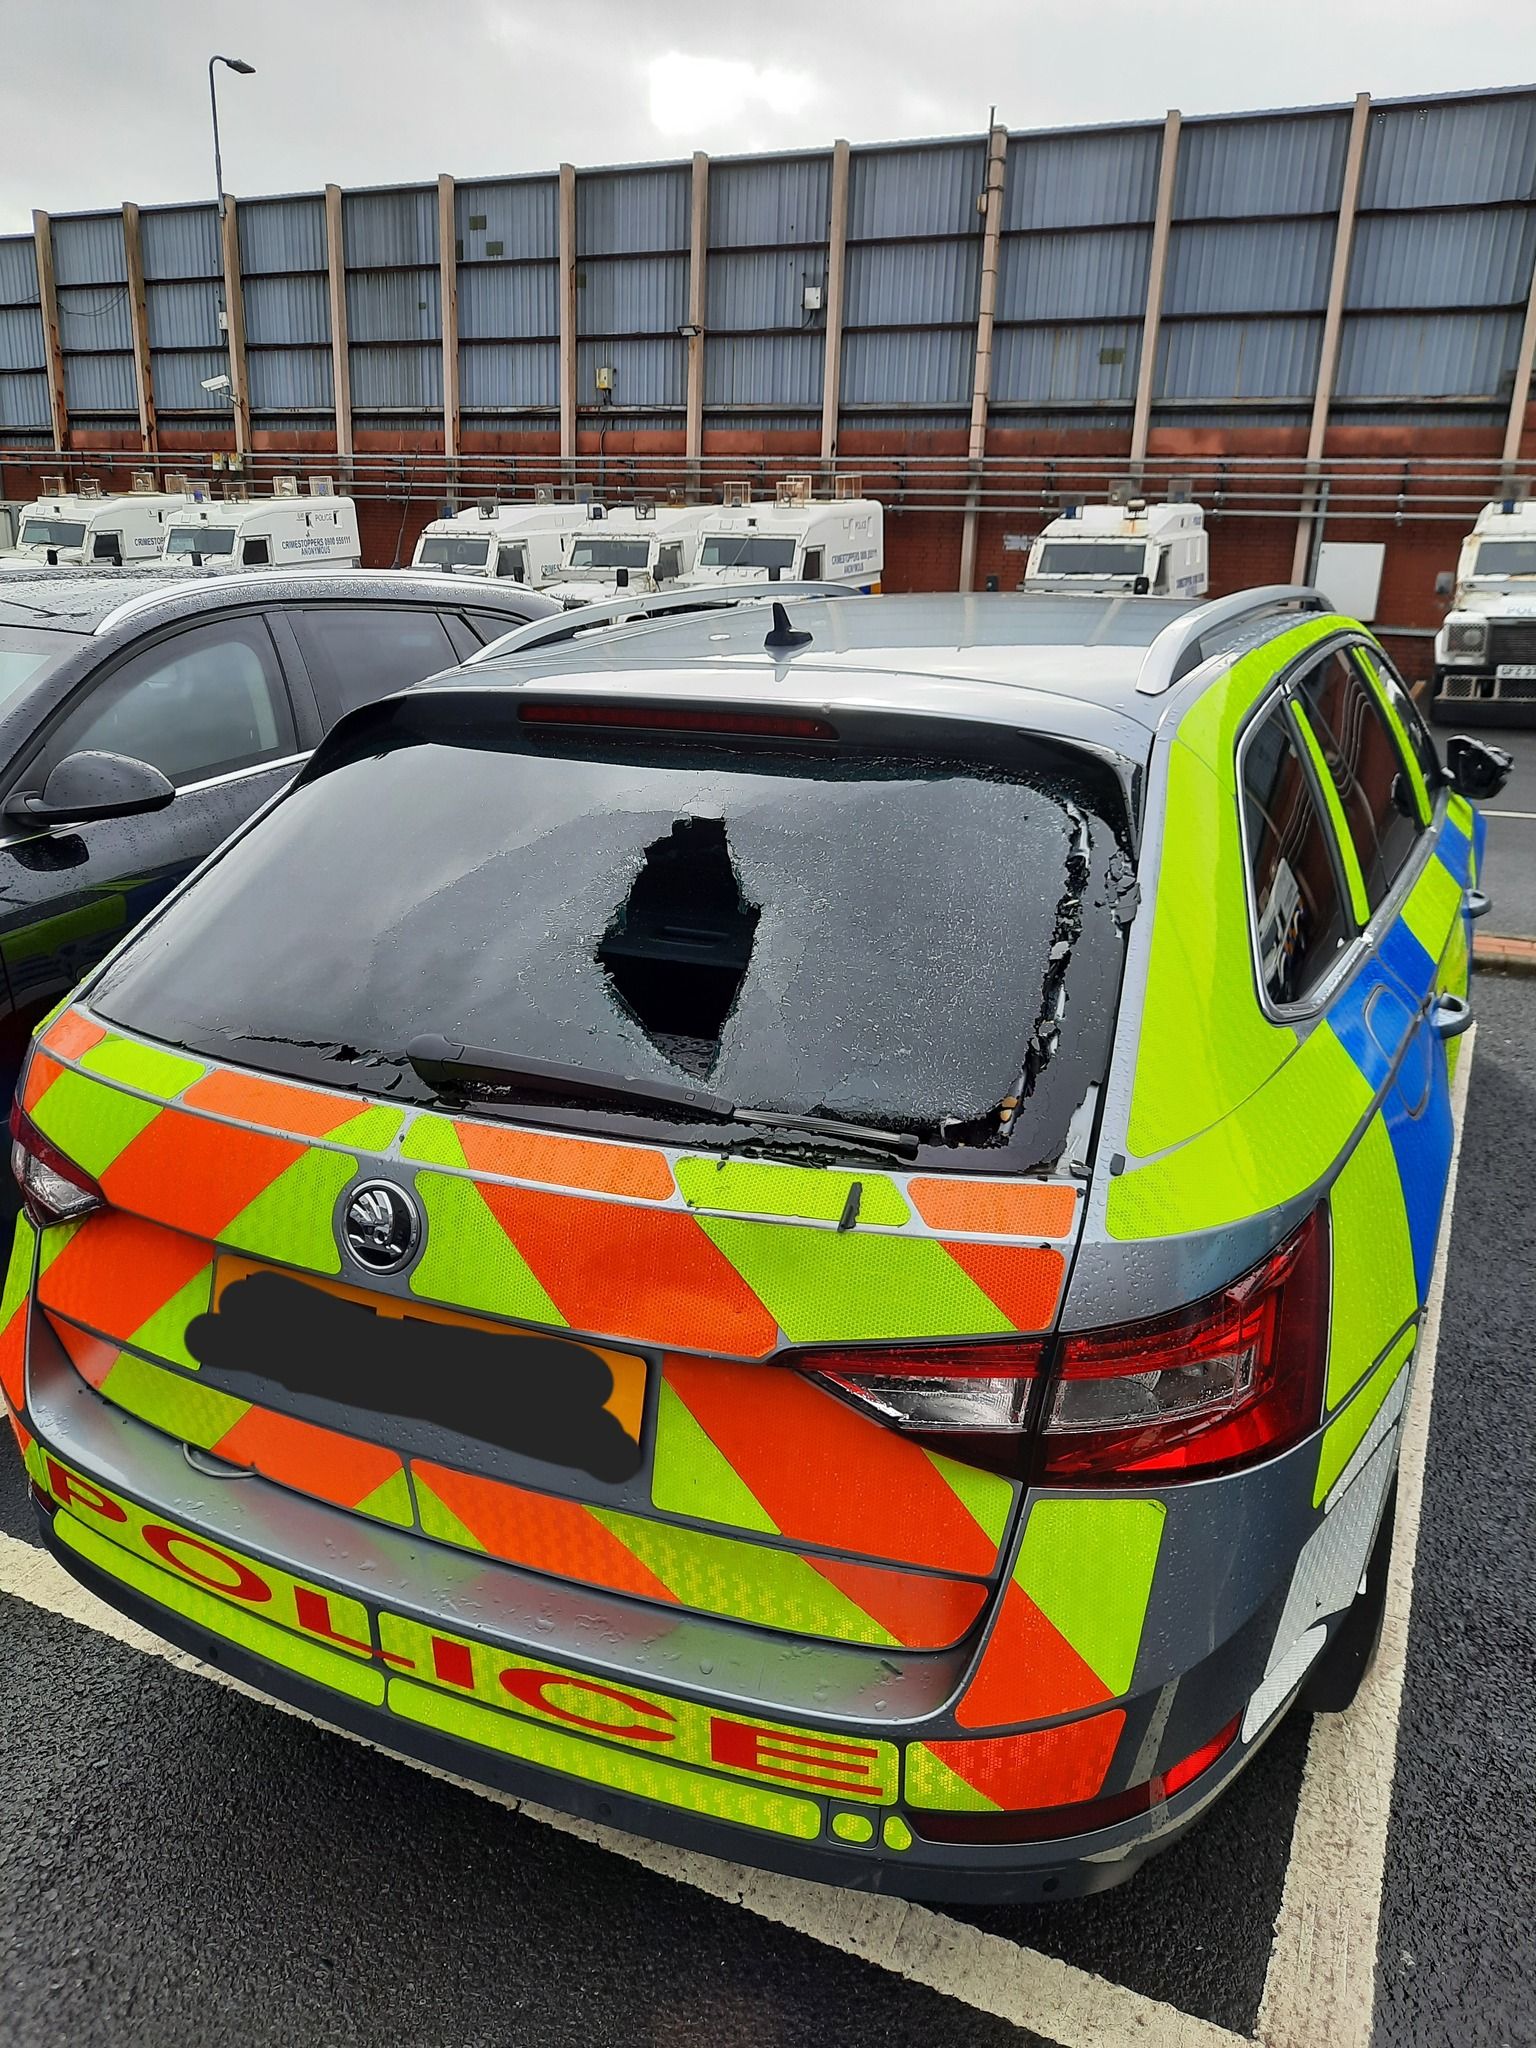 SHATTERED: The back windscreens of two police vehicles were damaged